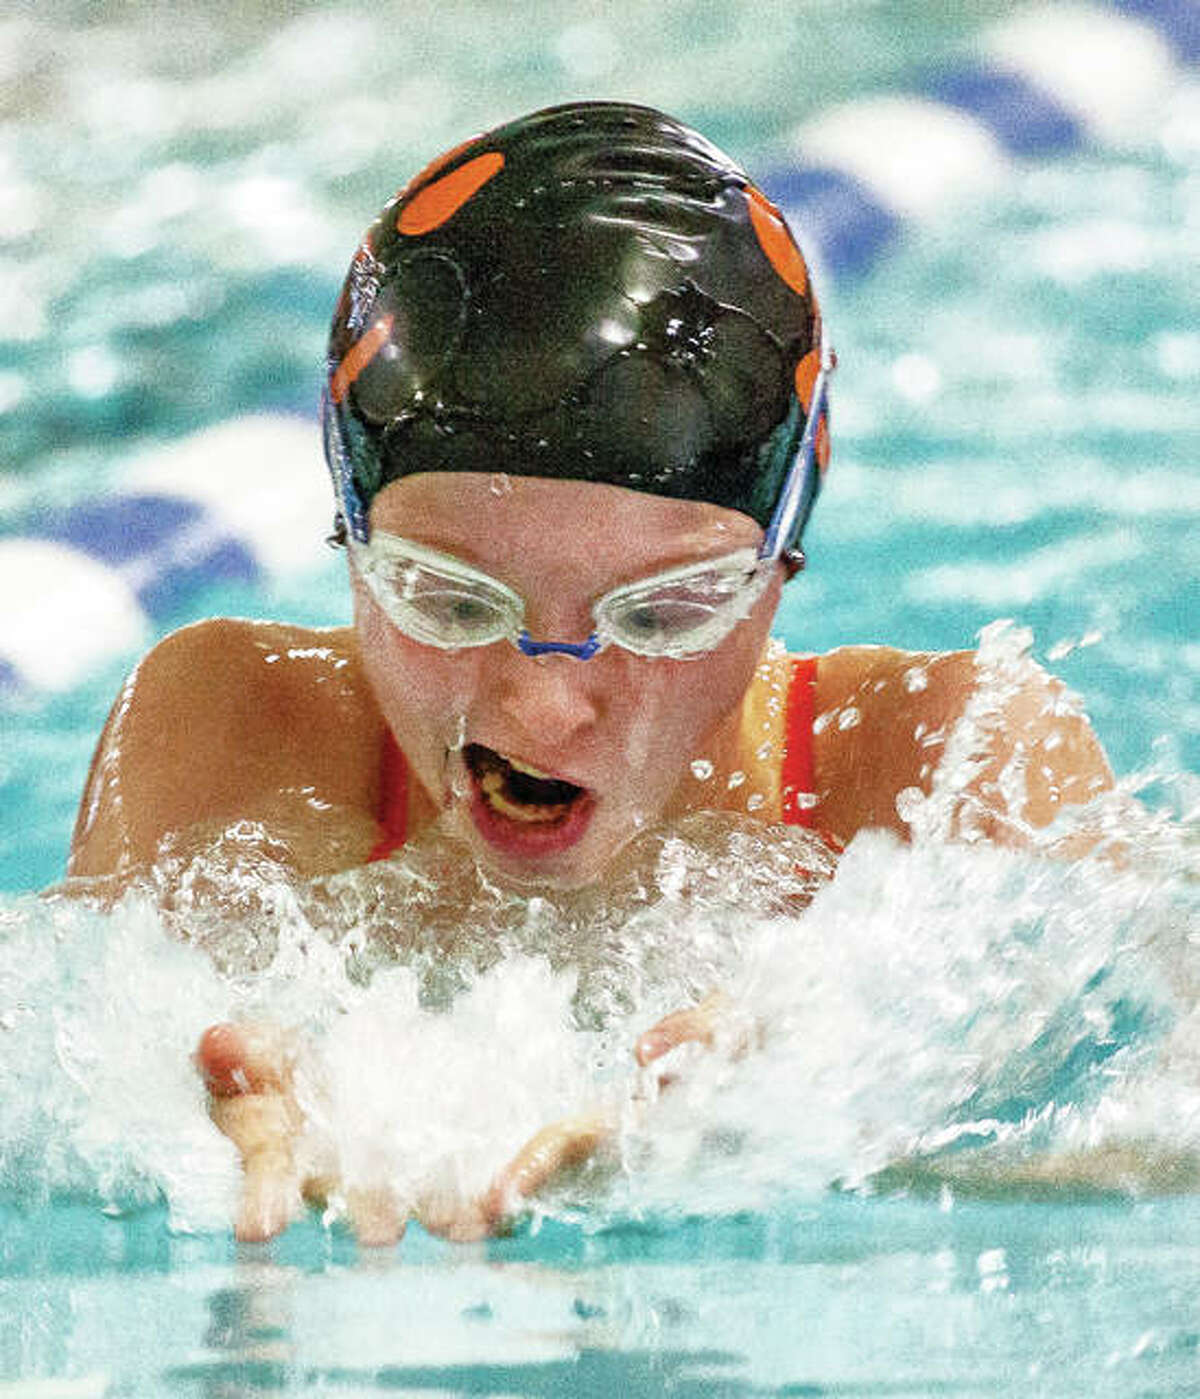 Edwardsville’s Sarah Lange swims in the 200-yard breaststroke Saturday in the Swim for Hope Invitational at the Chuck Fruit Aquatic Center. Lange finished third in a time of 2:43.45.